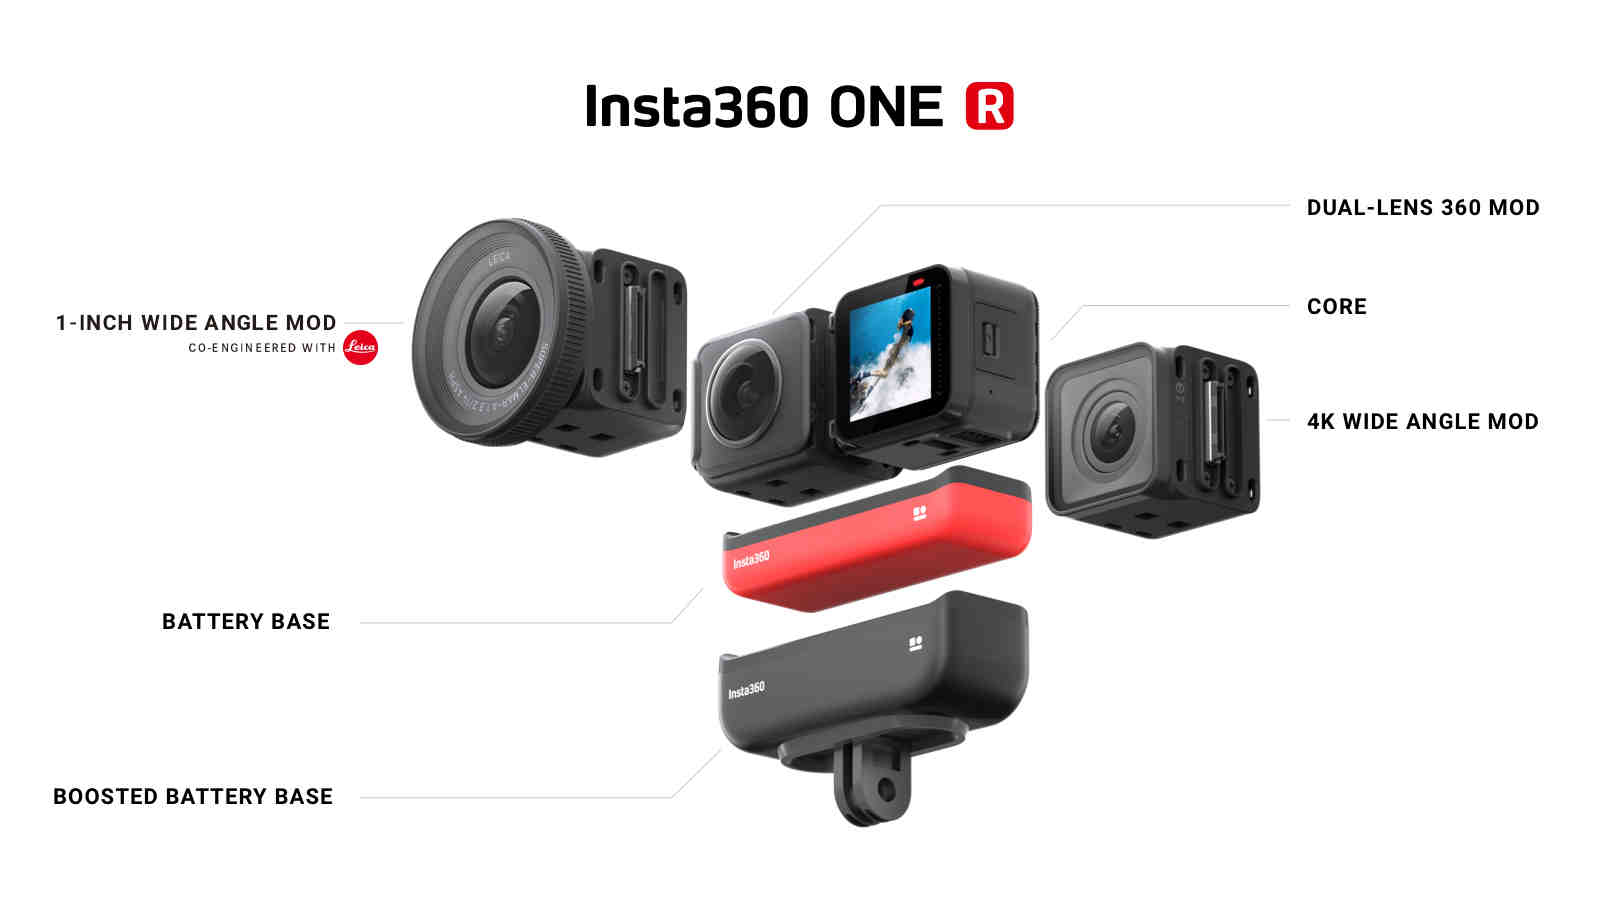 Is Insta360 a Chinese company?